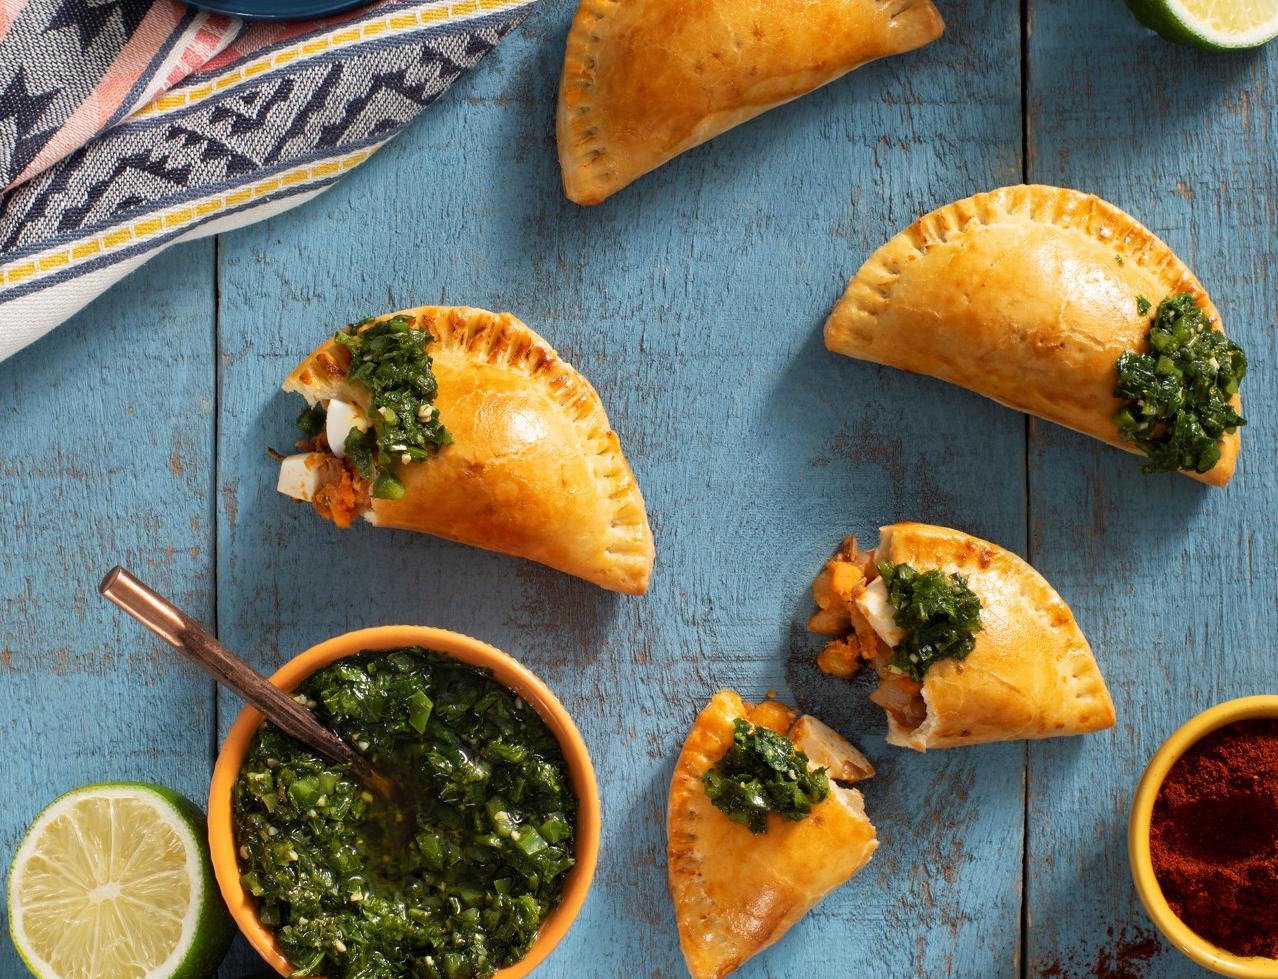  Delight your taste buds with these mouth-watering vegetarian hand pies.